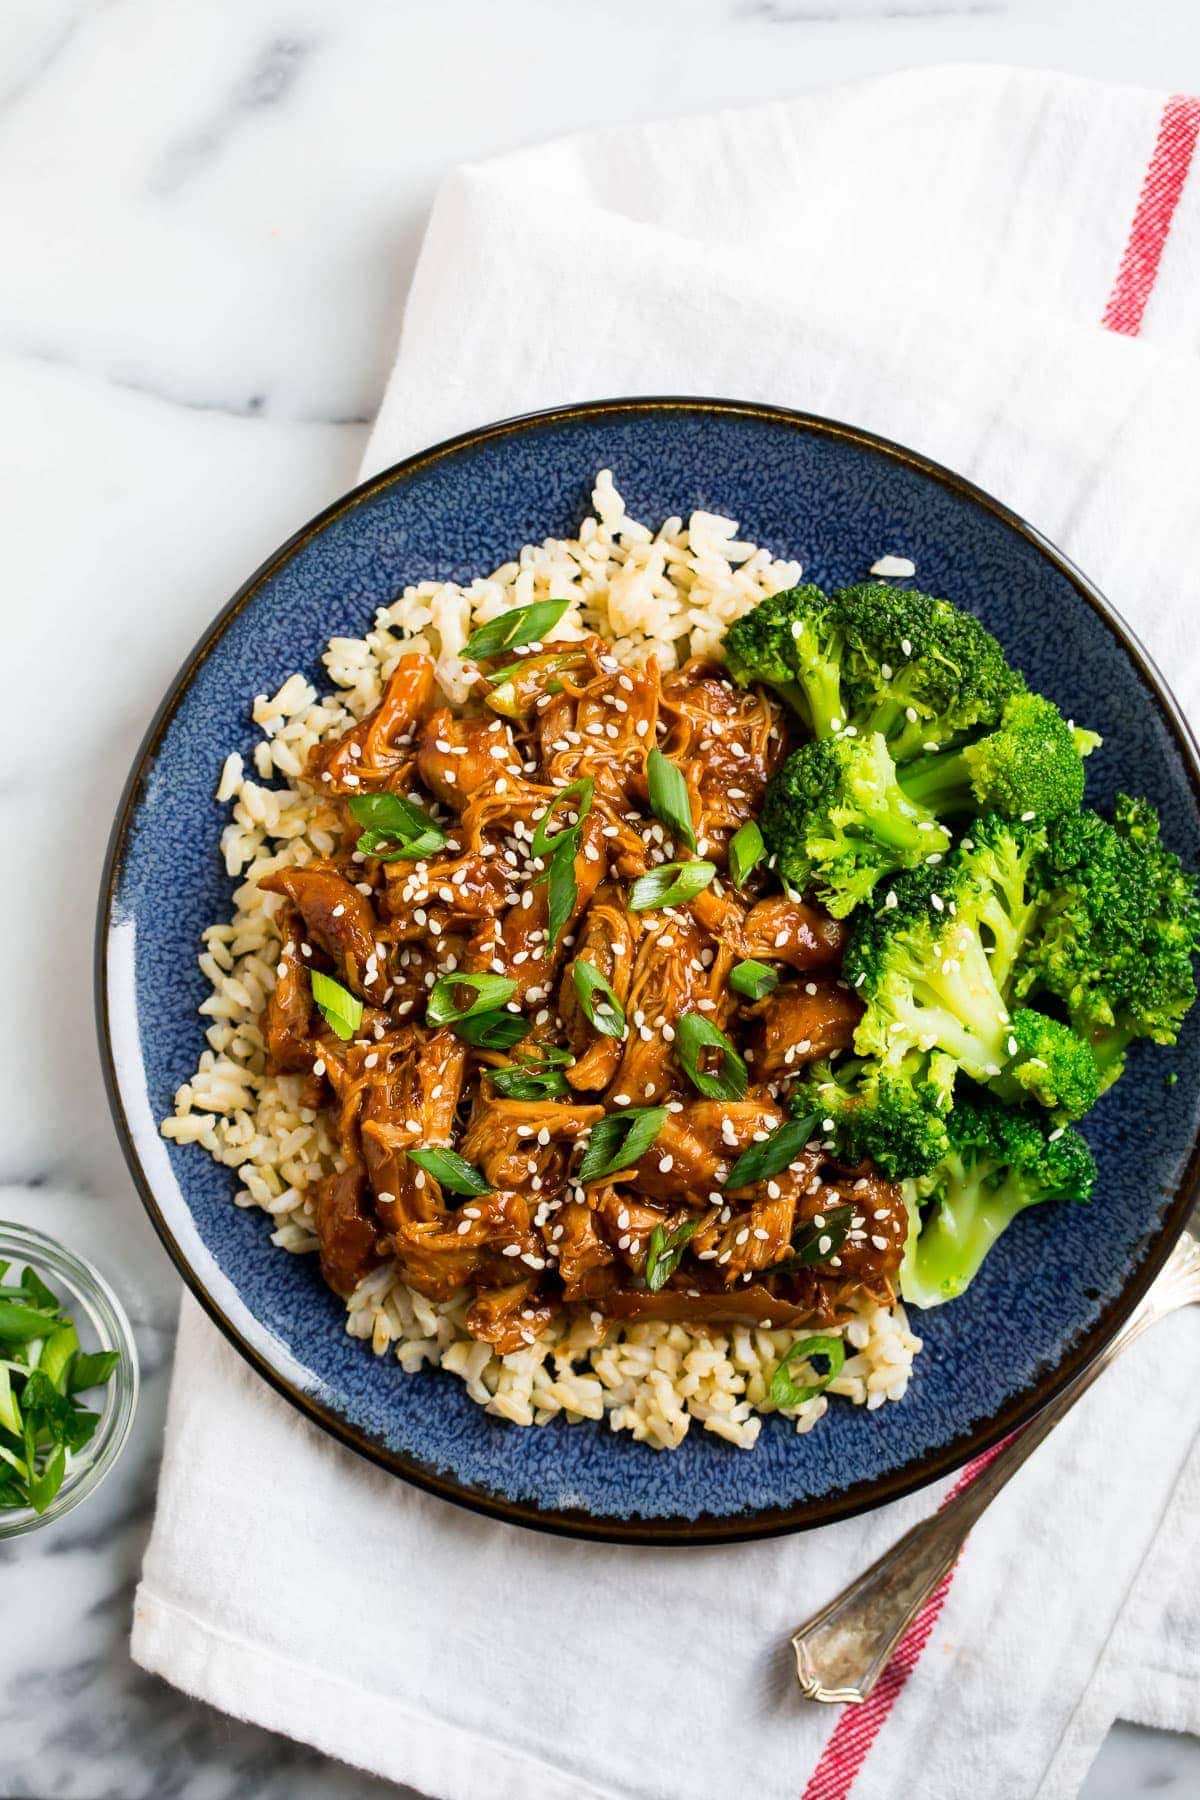 Healthy slow cooker honey garlic boneless skinless chicken thighs served on a plate with rice and broccoli